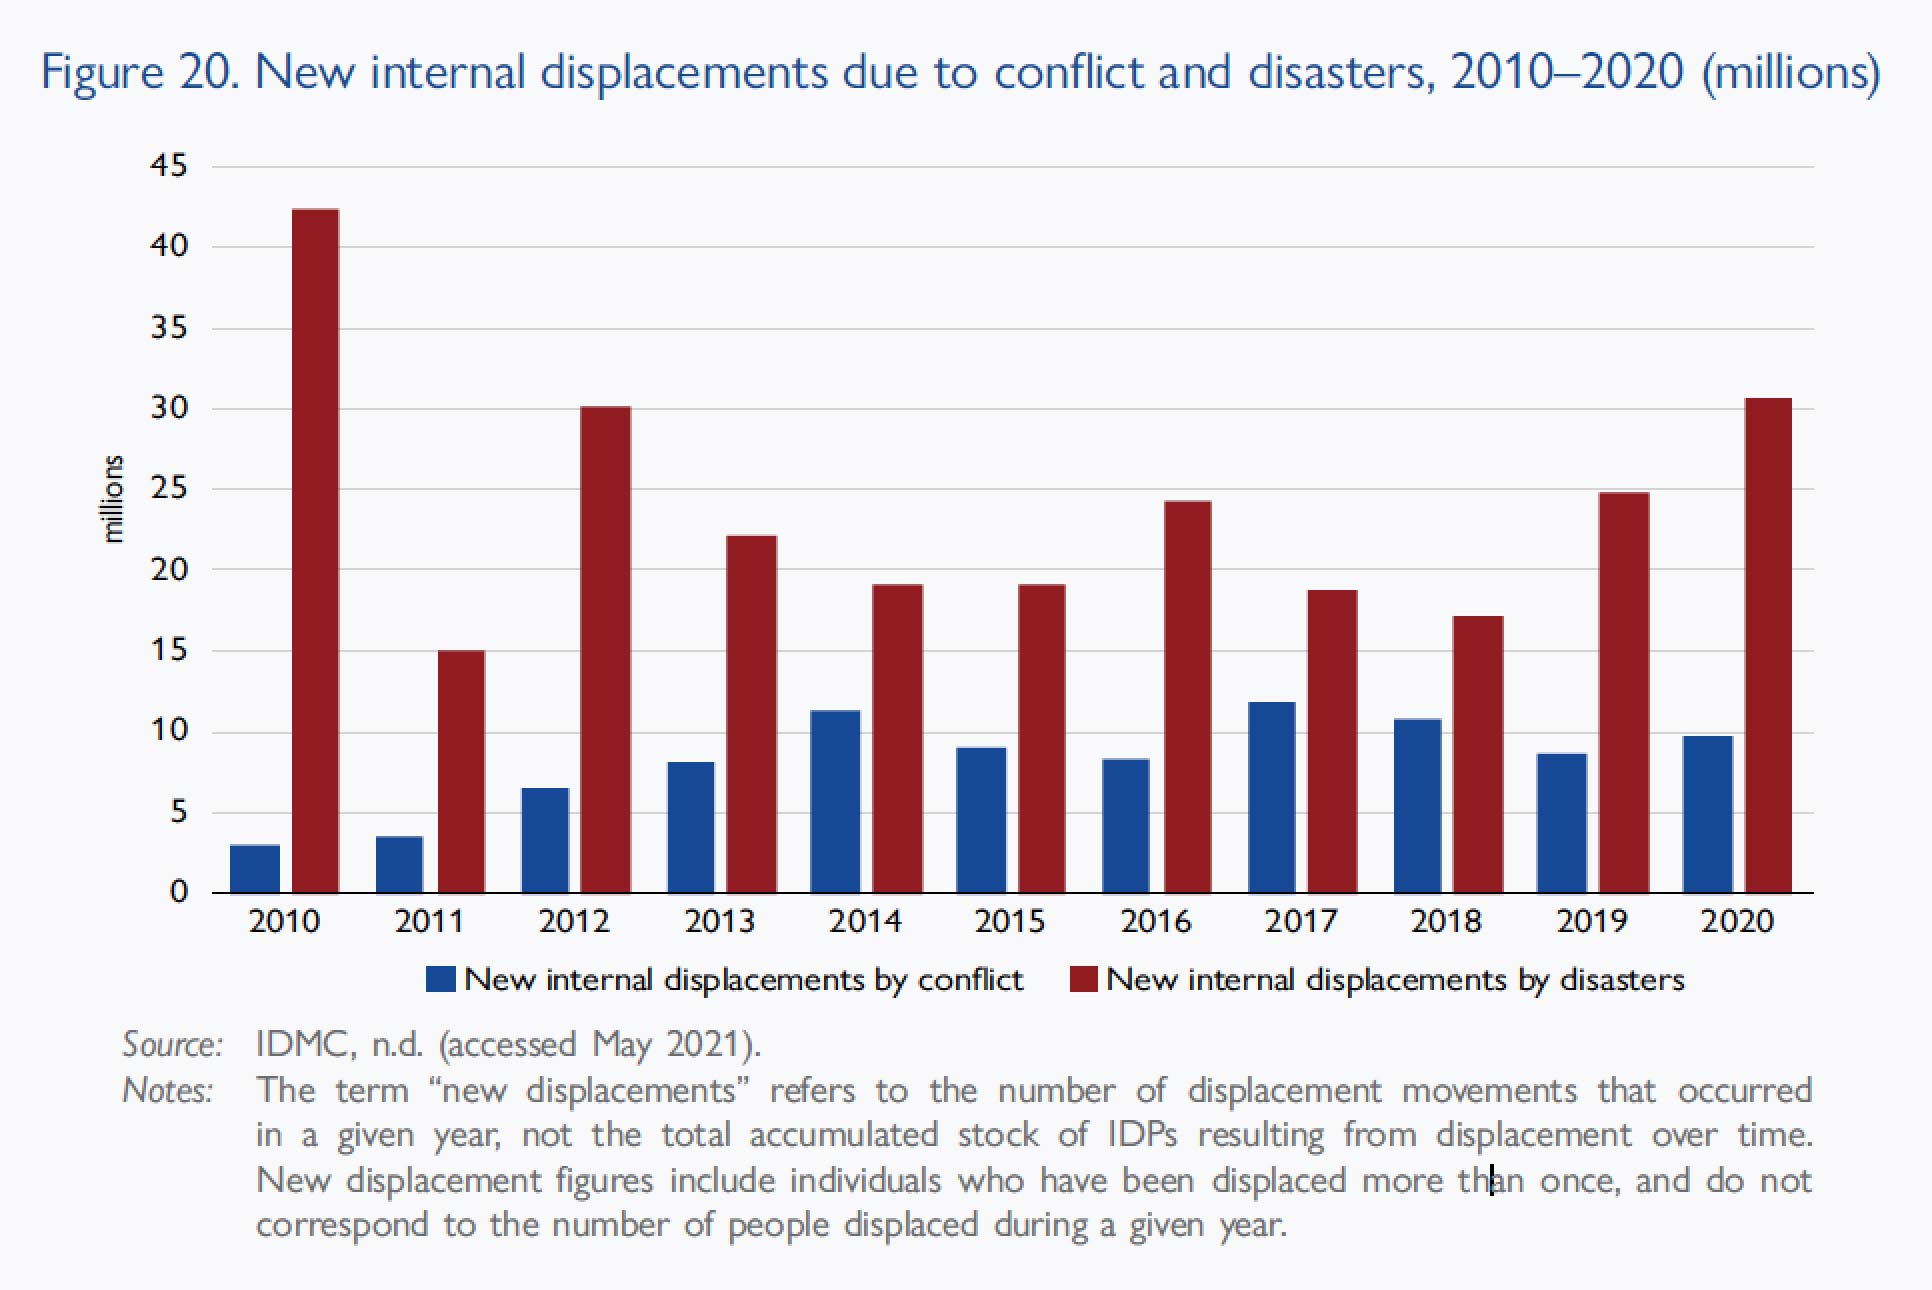 New internal displacements due to conflict and disasters